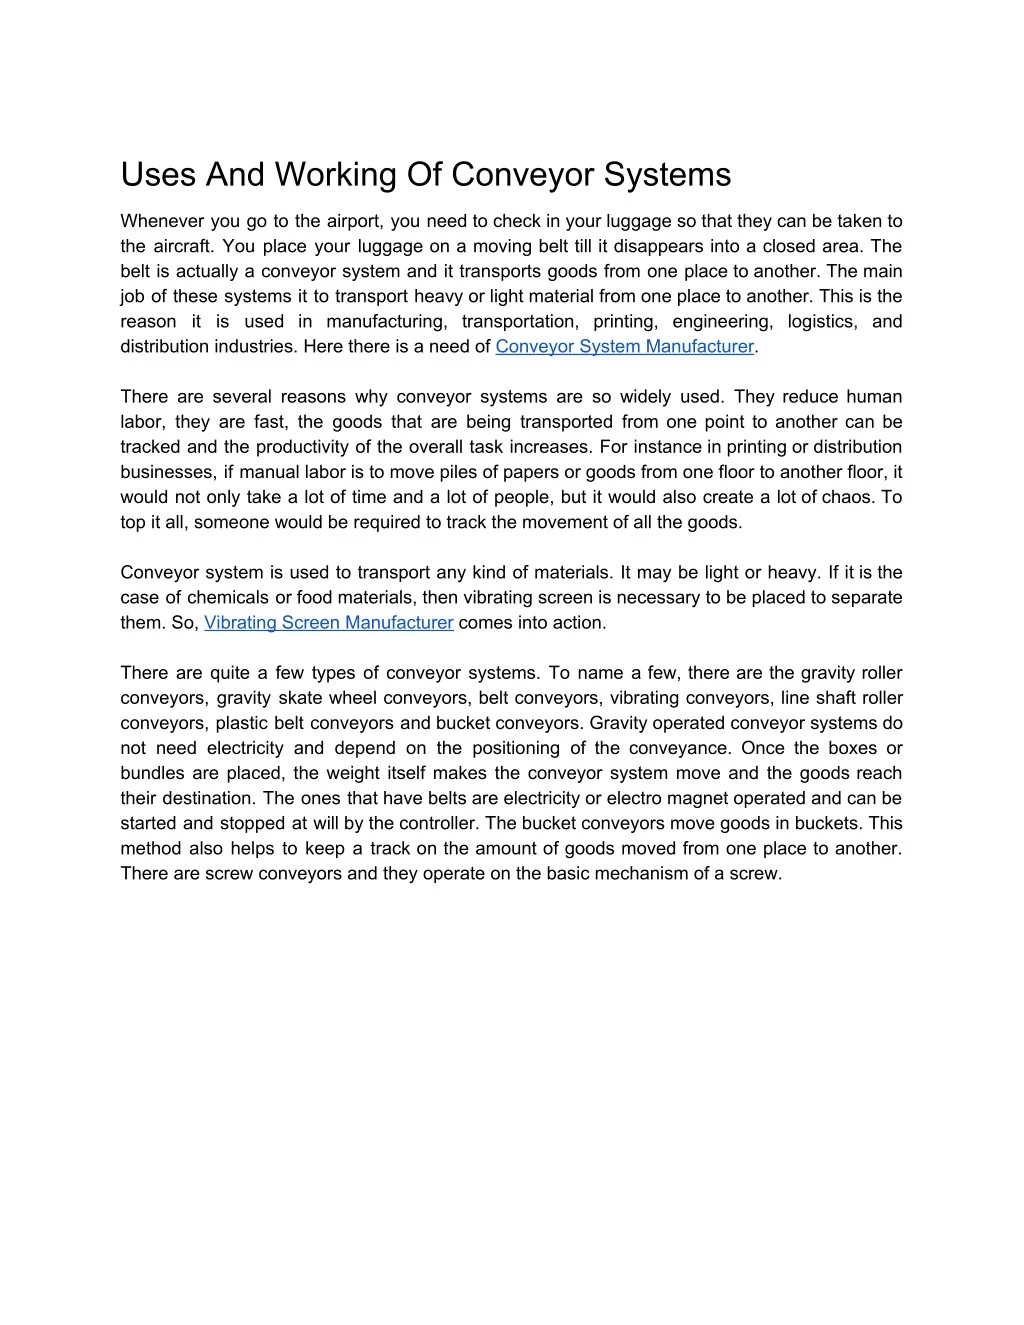 uses and working of conveyor systems